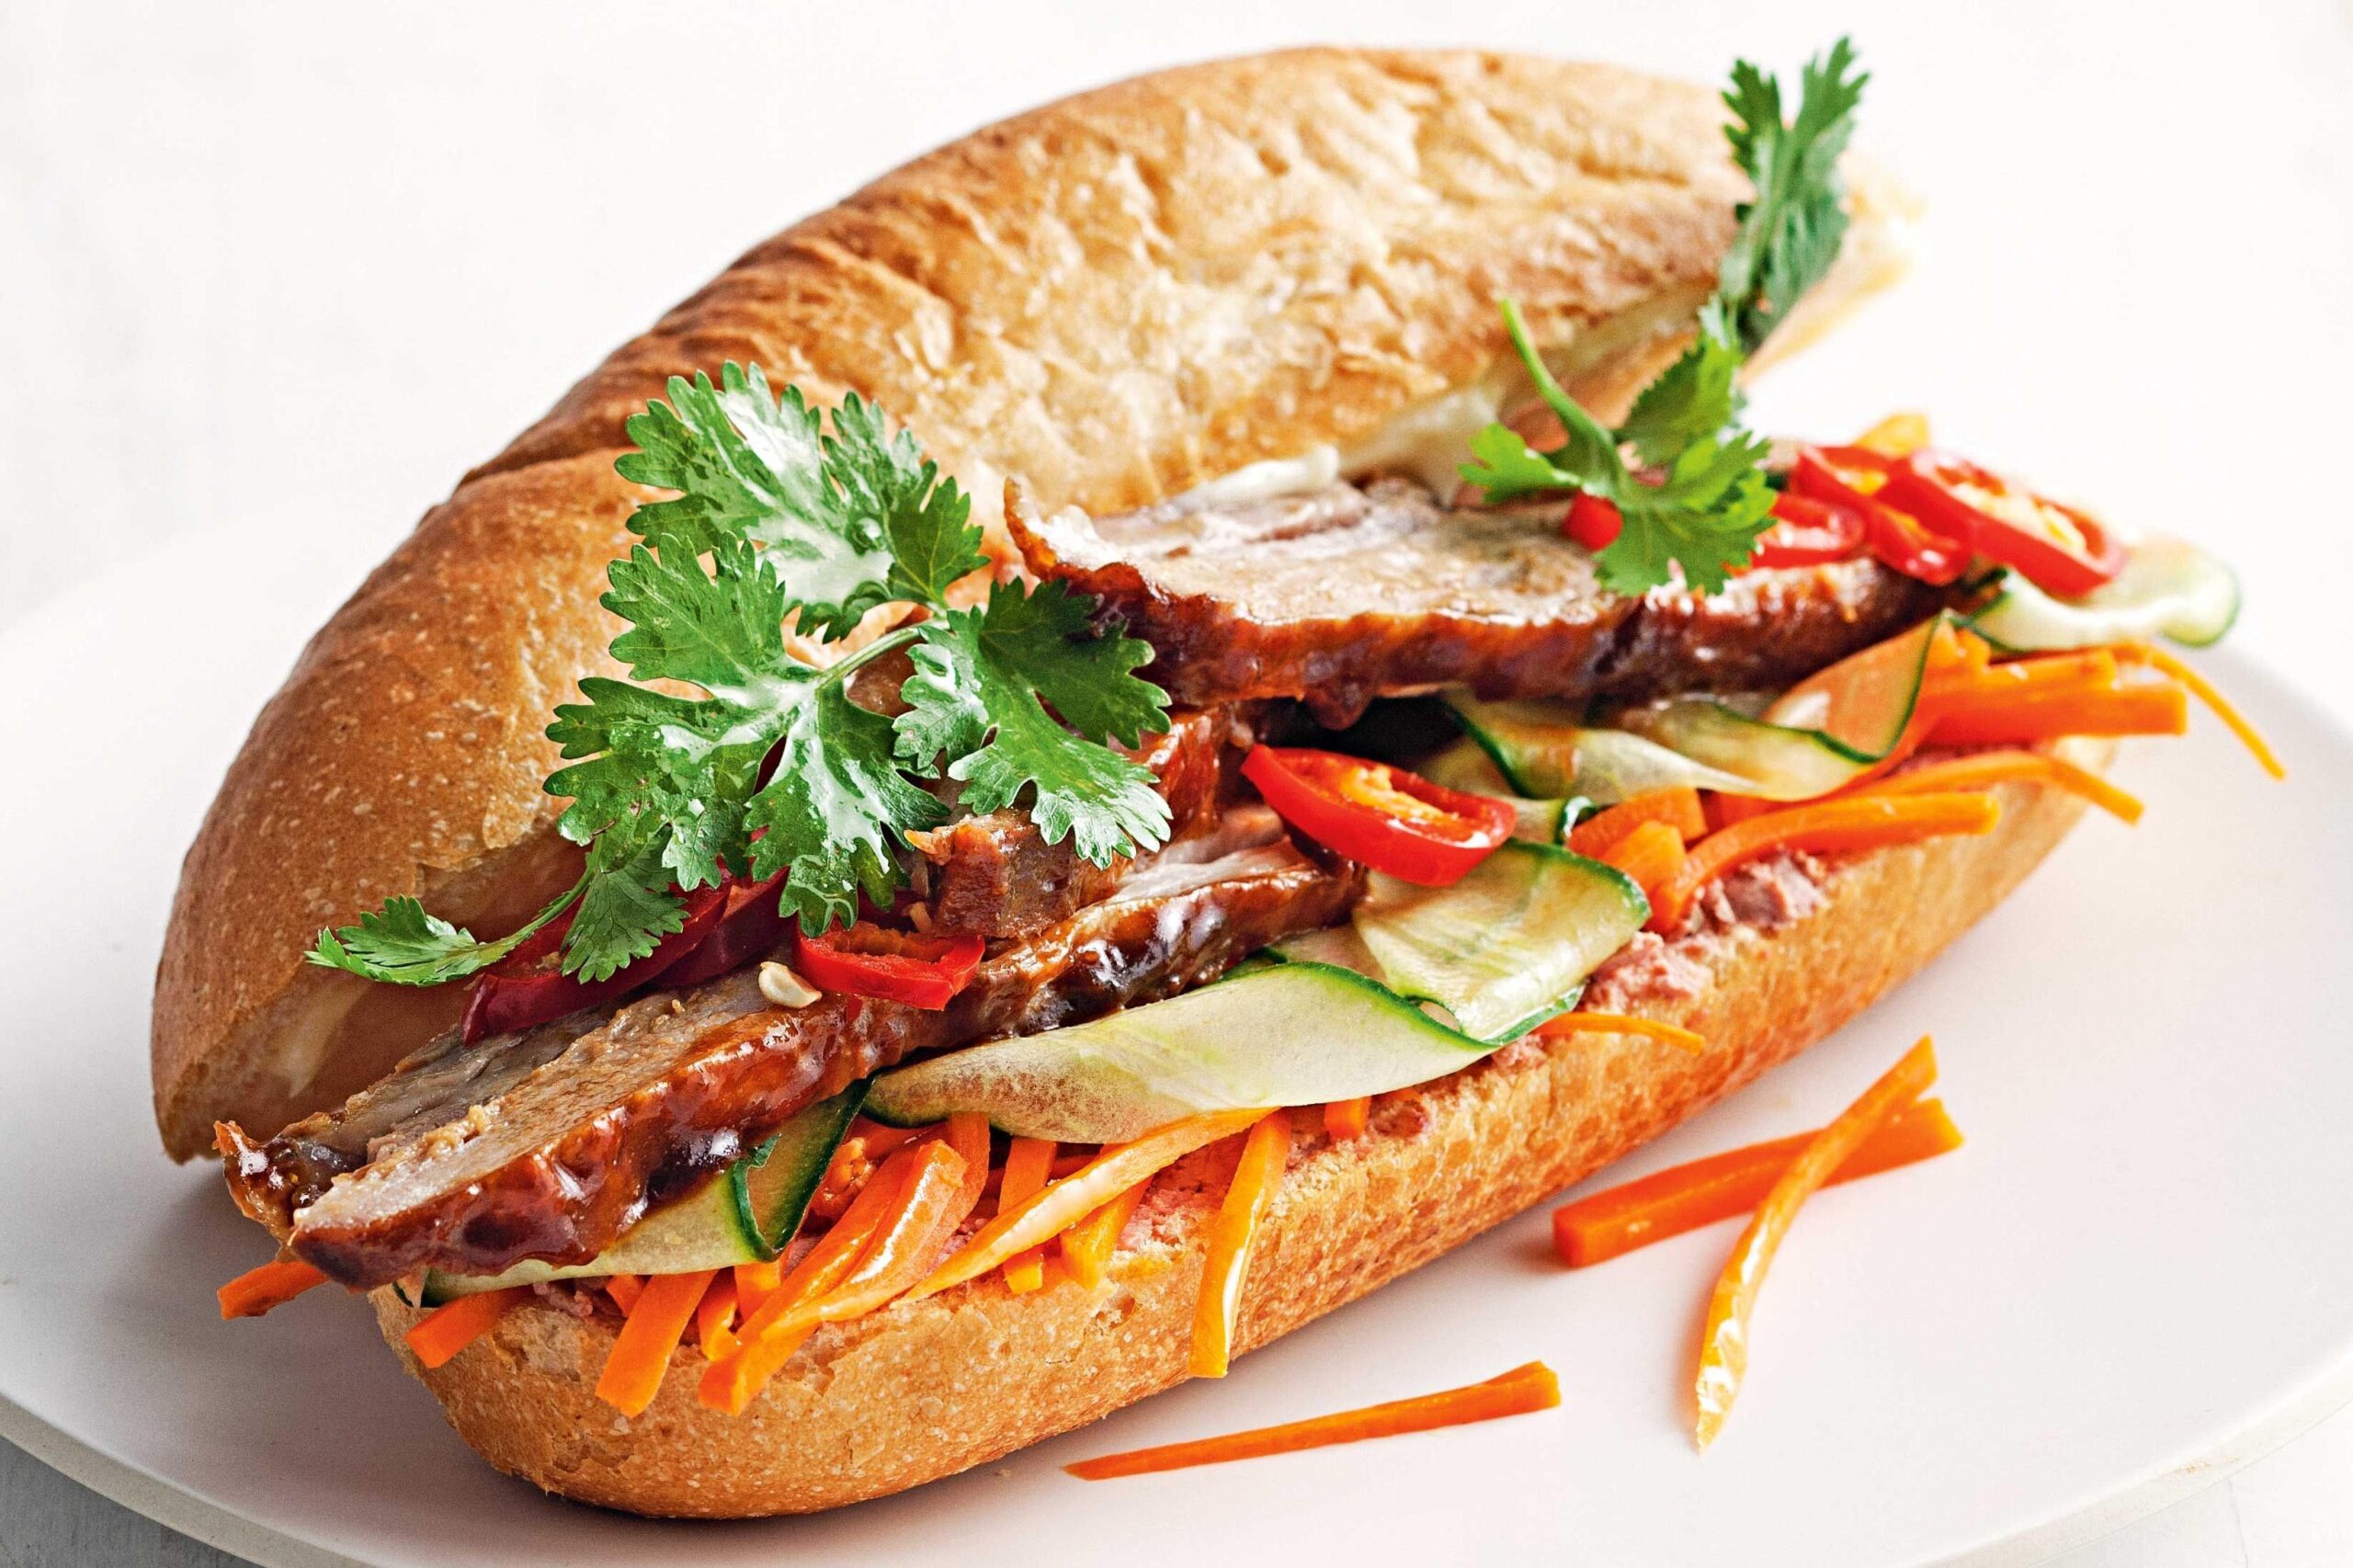  The pickled veggies in Roasted Pork Banh Mi add a pop of flavor